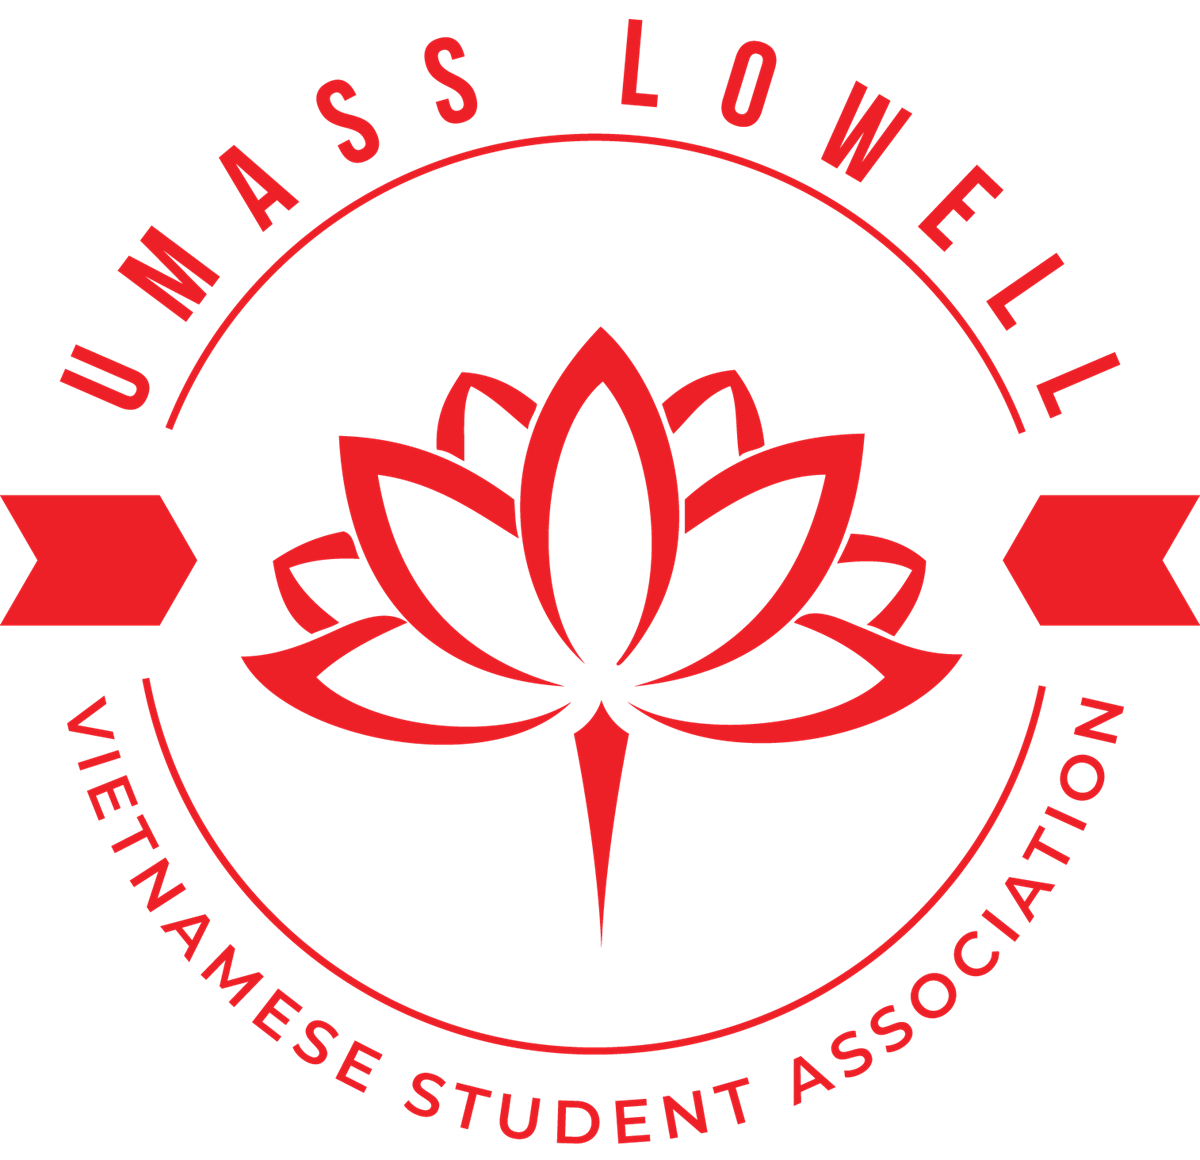 In All red, Top Curved: UMass Lowell letters, bottom Curved: Vietnamese Student Association, middle: a lotus flower